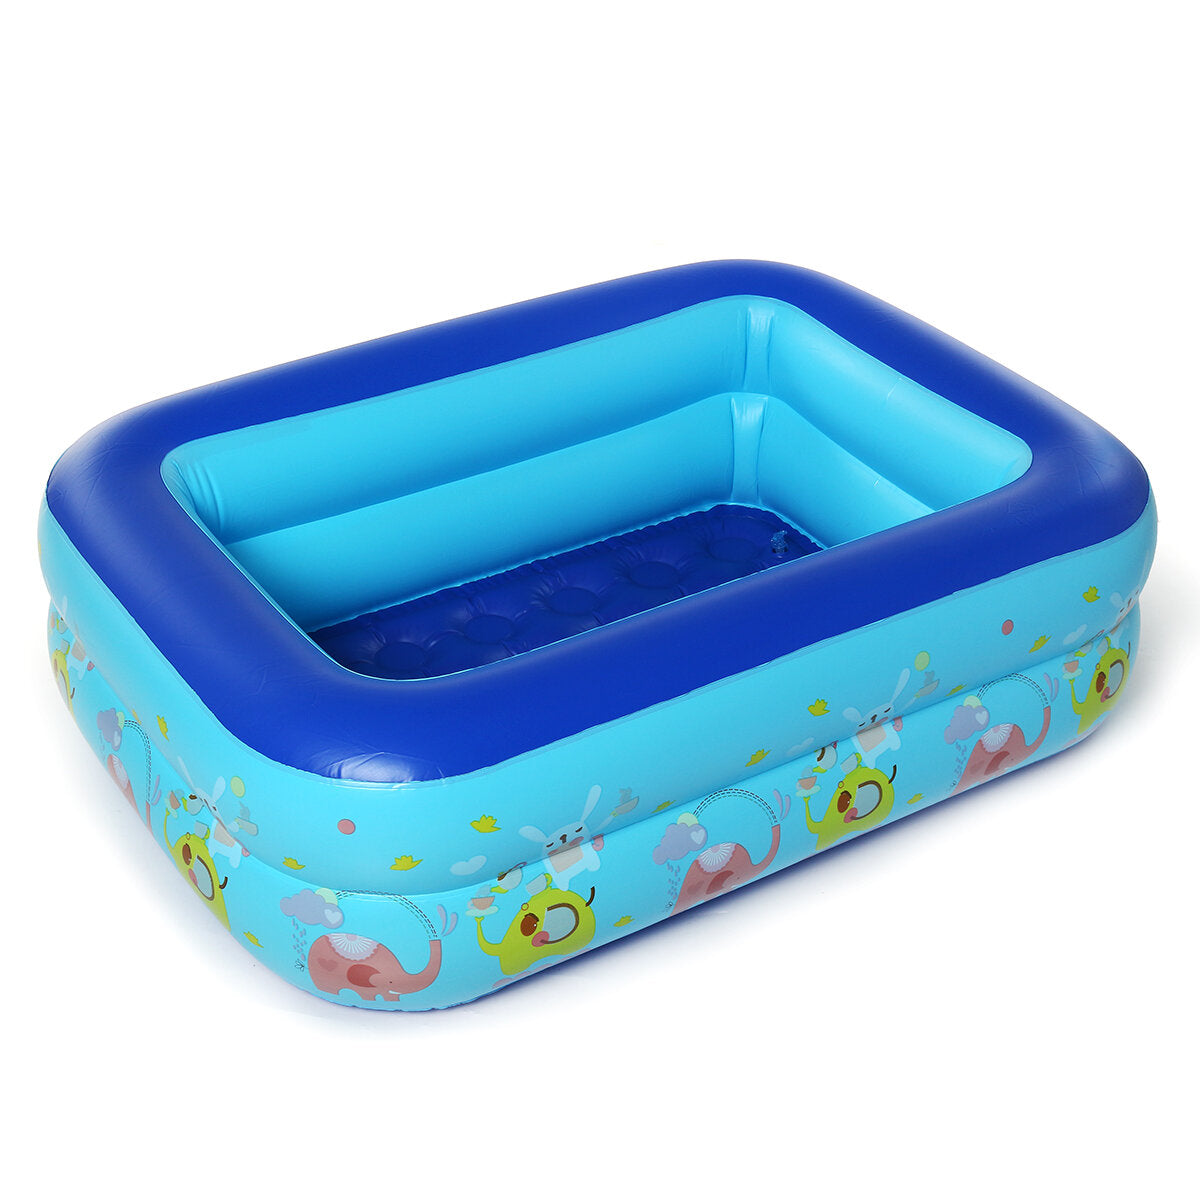 120/130/150CM Inflatable Swimming Pool Kids Adult Summer Bathtub PVC Family Water Toy